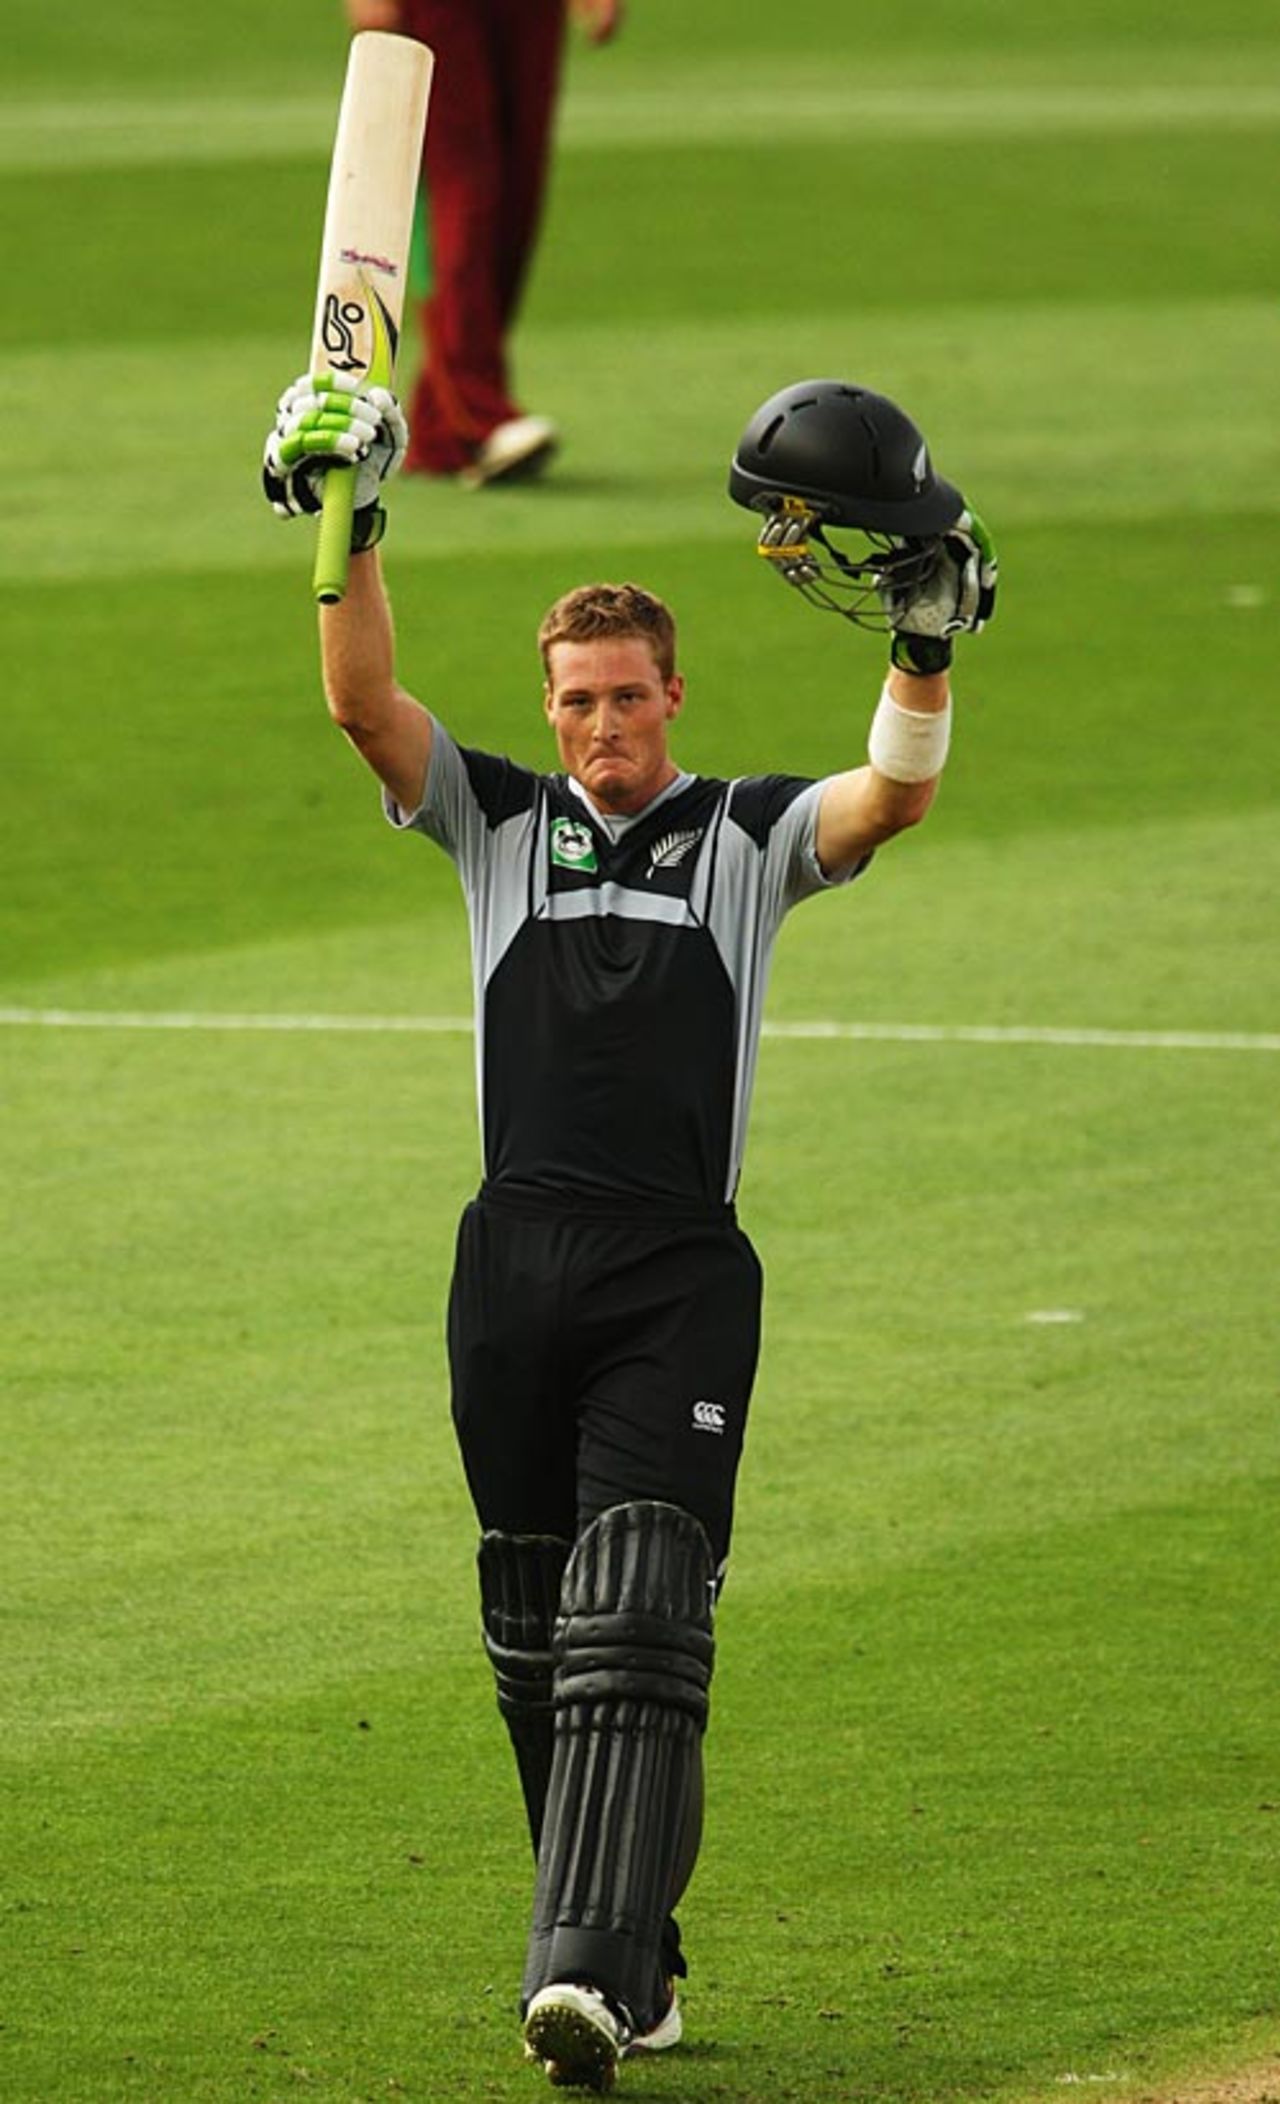 Martin Guptill scored a hundred on debut, New Zealand v West Indies, 4th ODI, Auckland, January 10, 2009